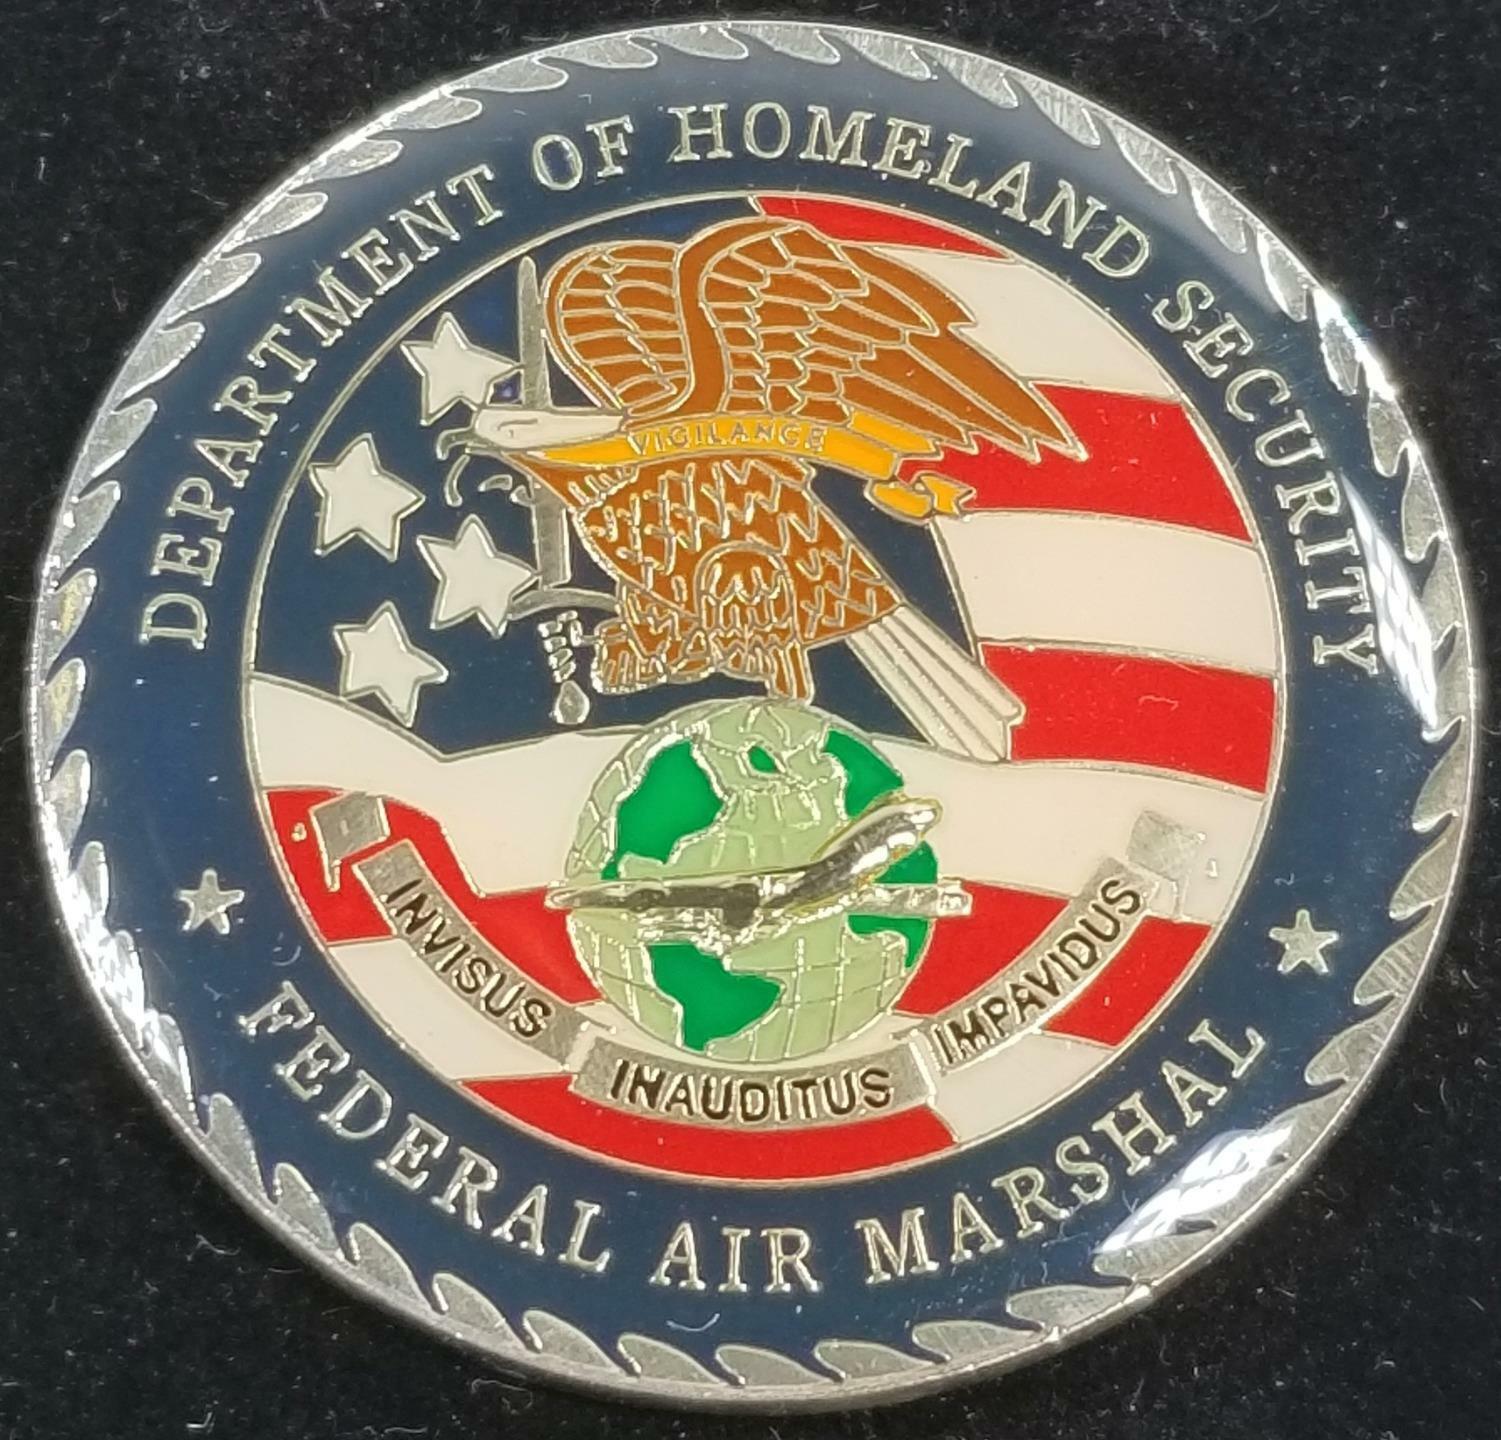 Federal Air Marshal FAM Pittsburgh Field Office Never Forget D HS Challenge Coin